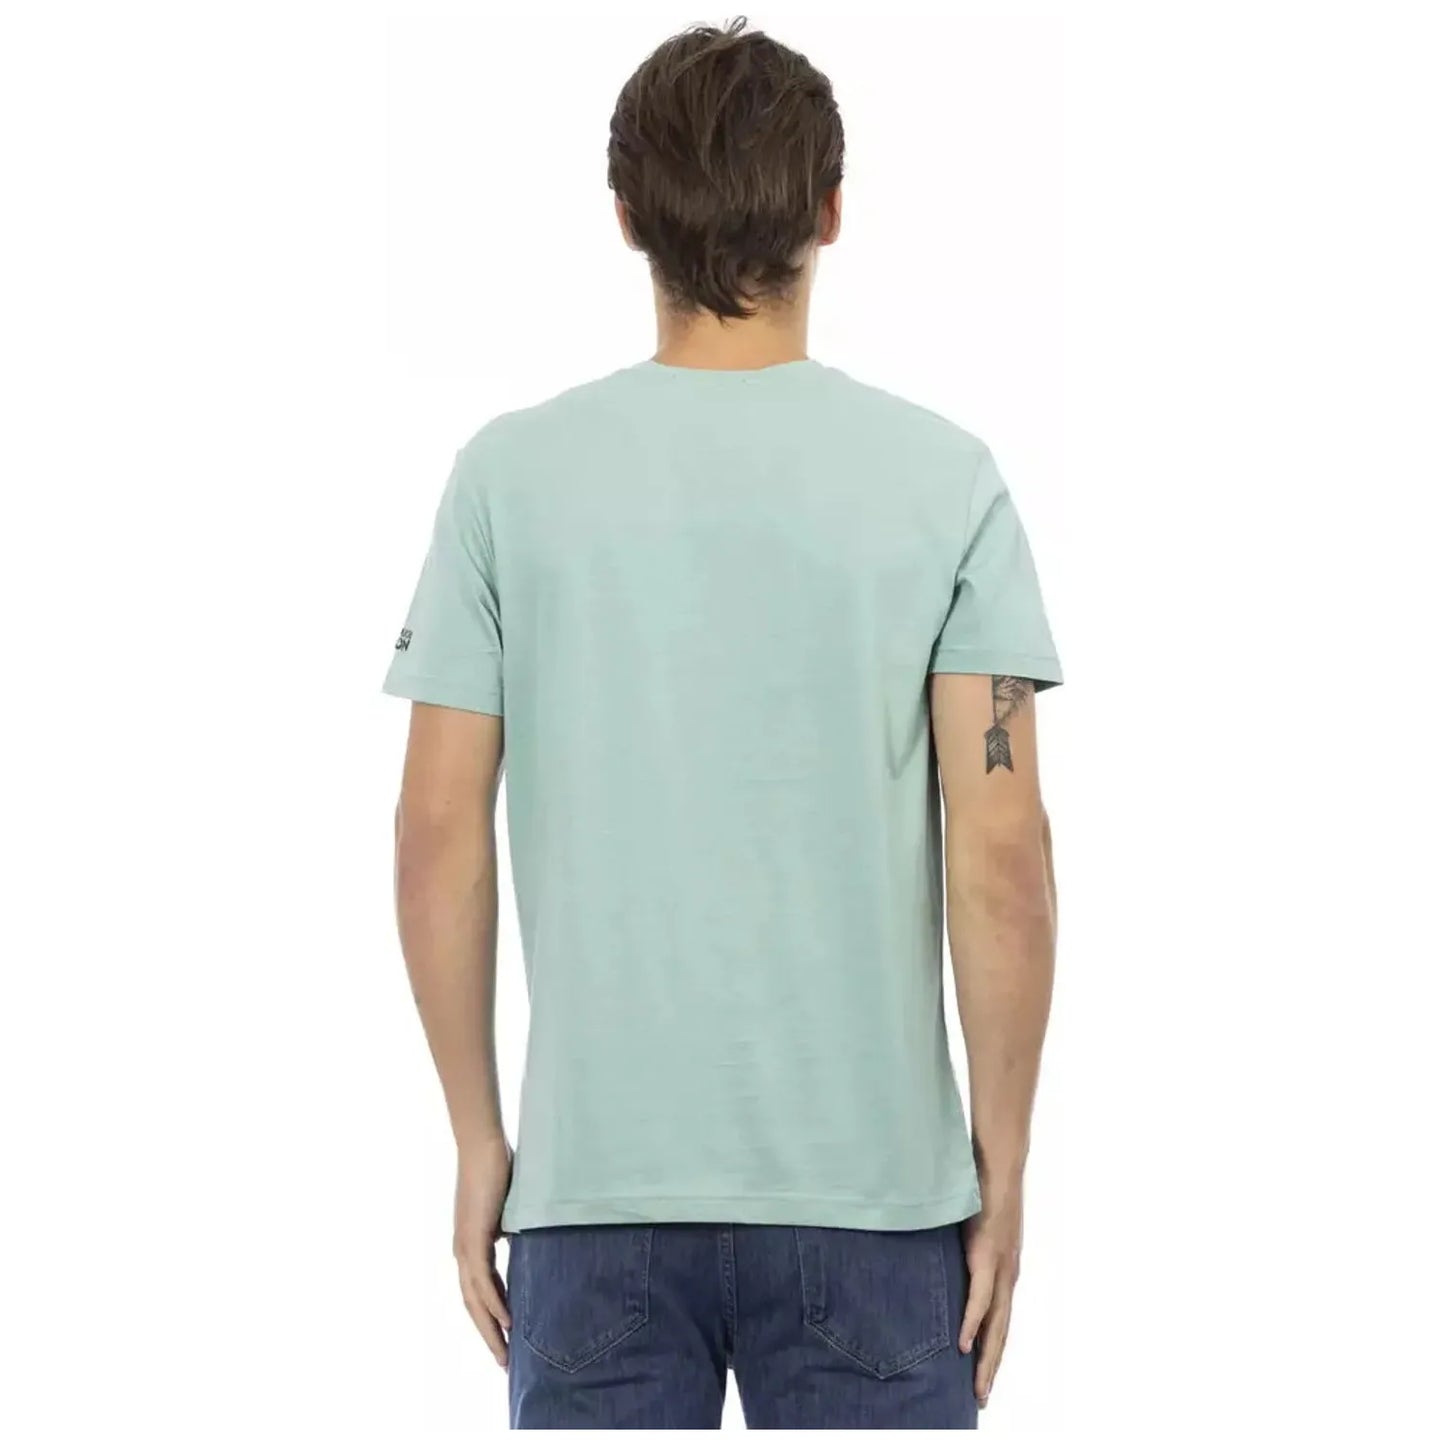 Trussardi Action Vibrant Green V-Neck T-Shirt with Front Print green-cotton-t-shirt-7